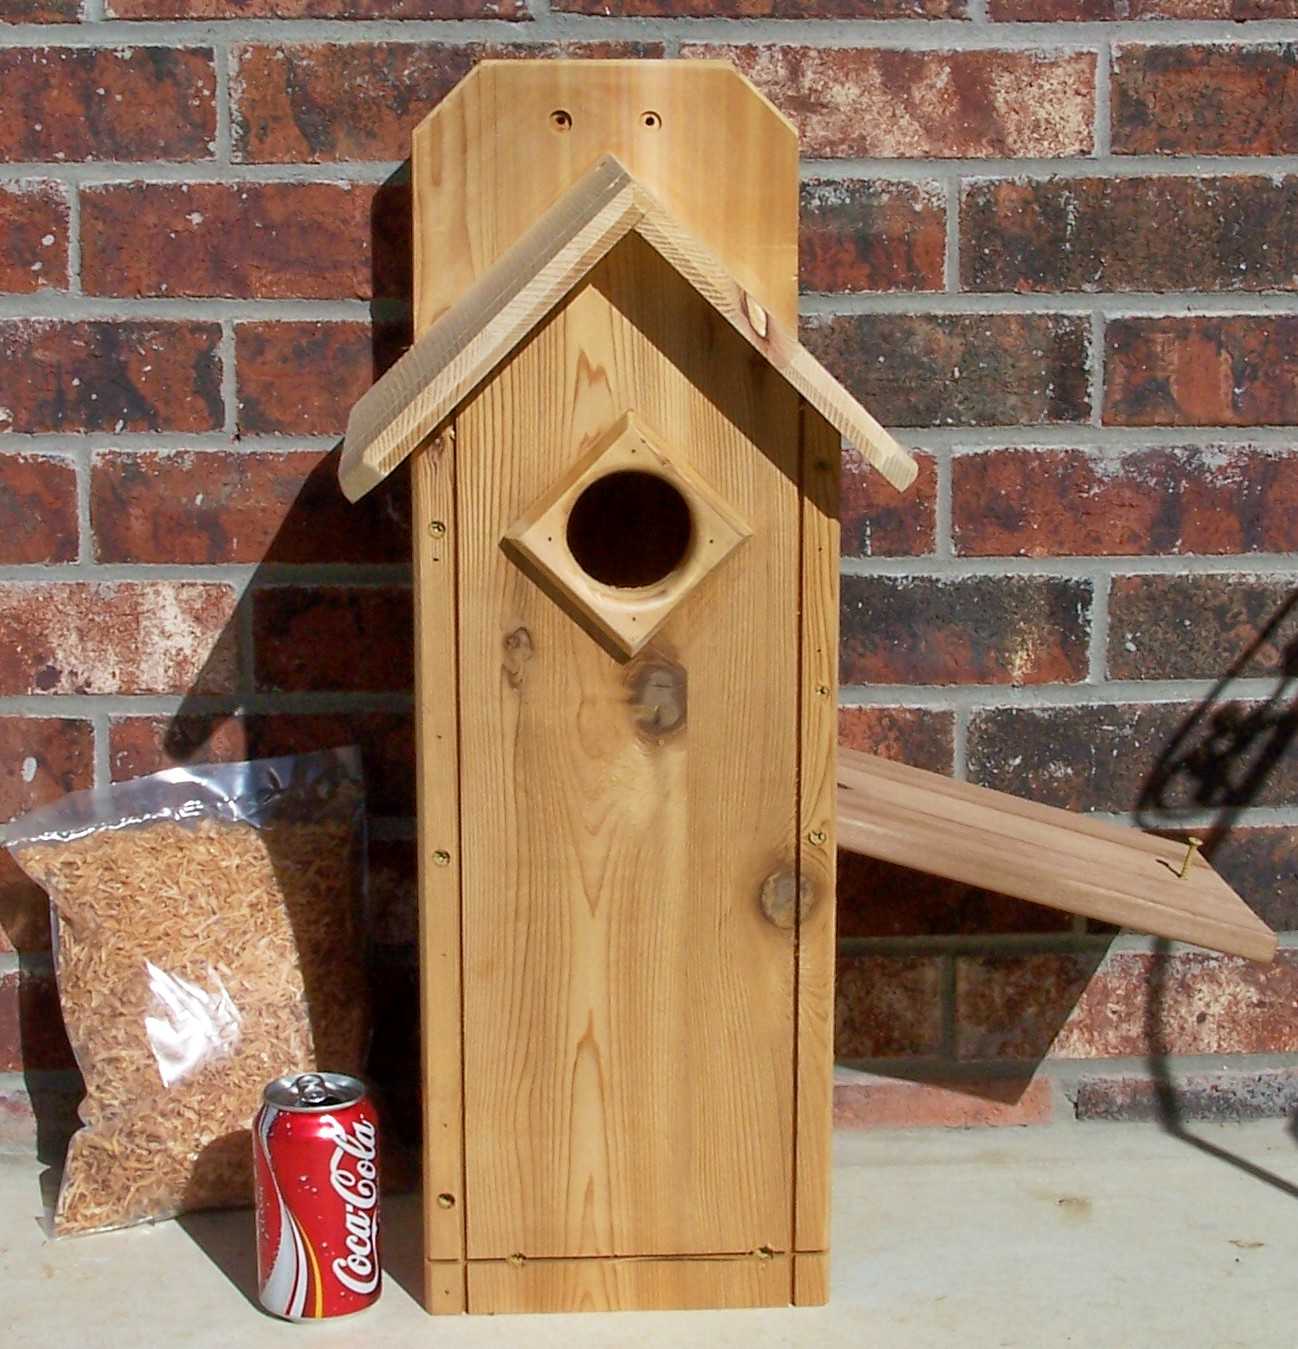 Woodworking Plans For Bird Nesting Crib Makers